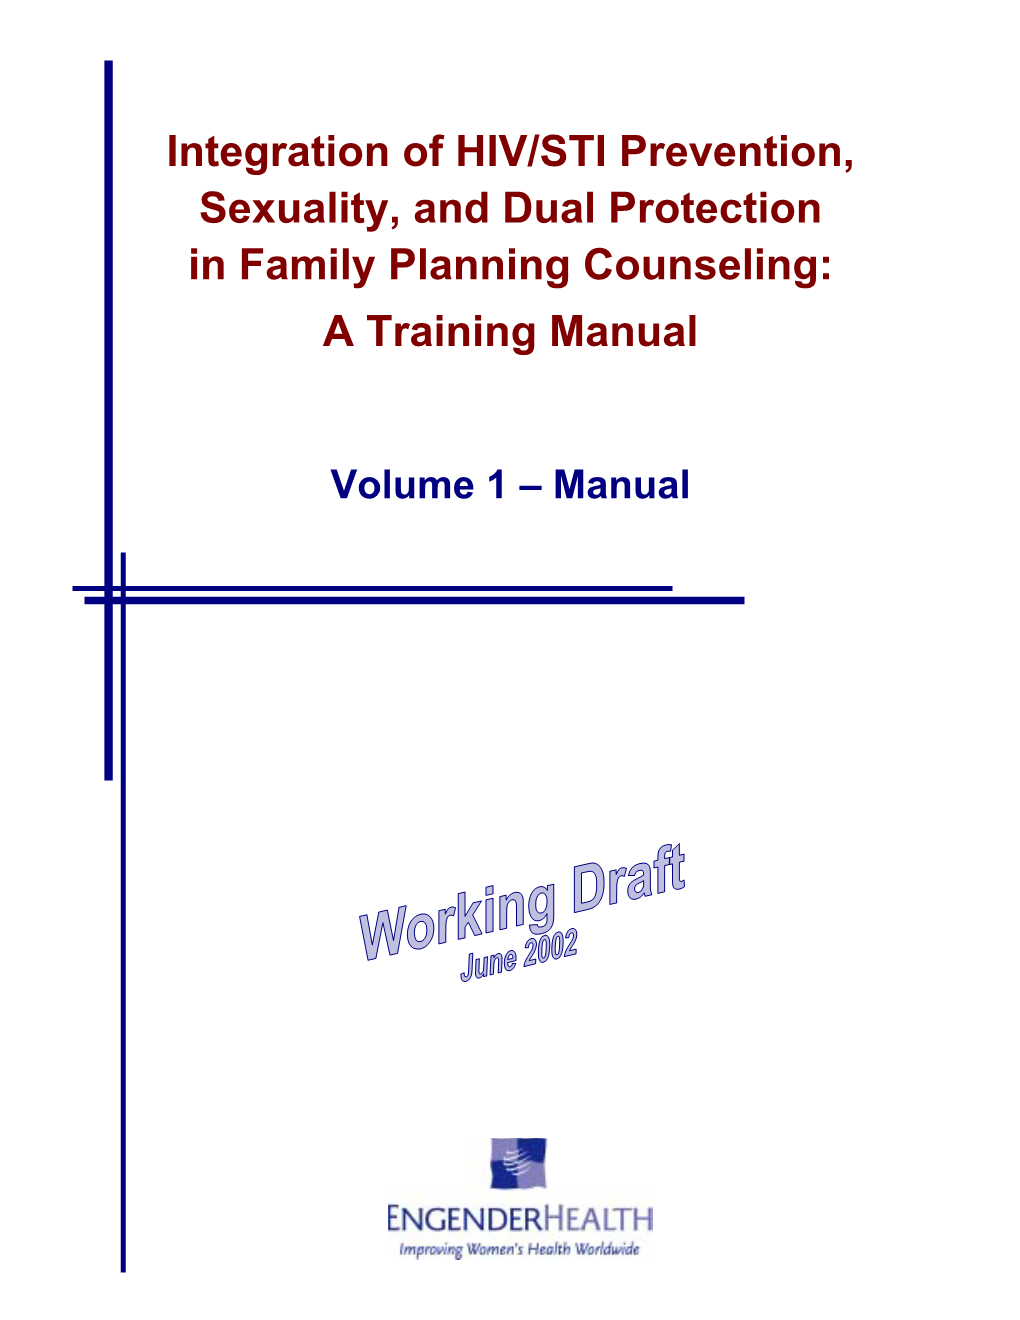 Integration of HIV/STI Prevention, Sexuality, and Dual Protection in Family Planning Counseling: a Training Manual